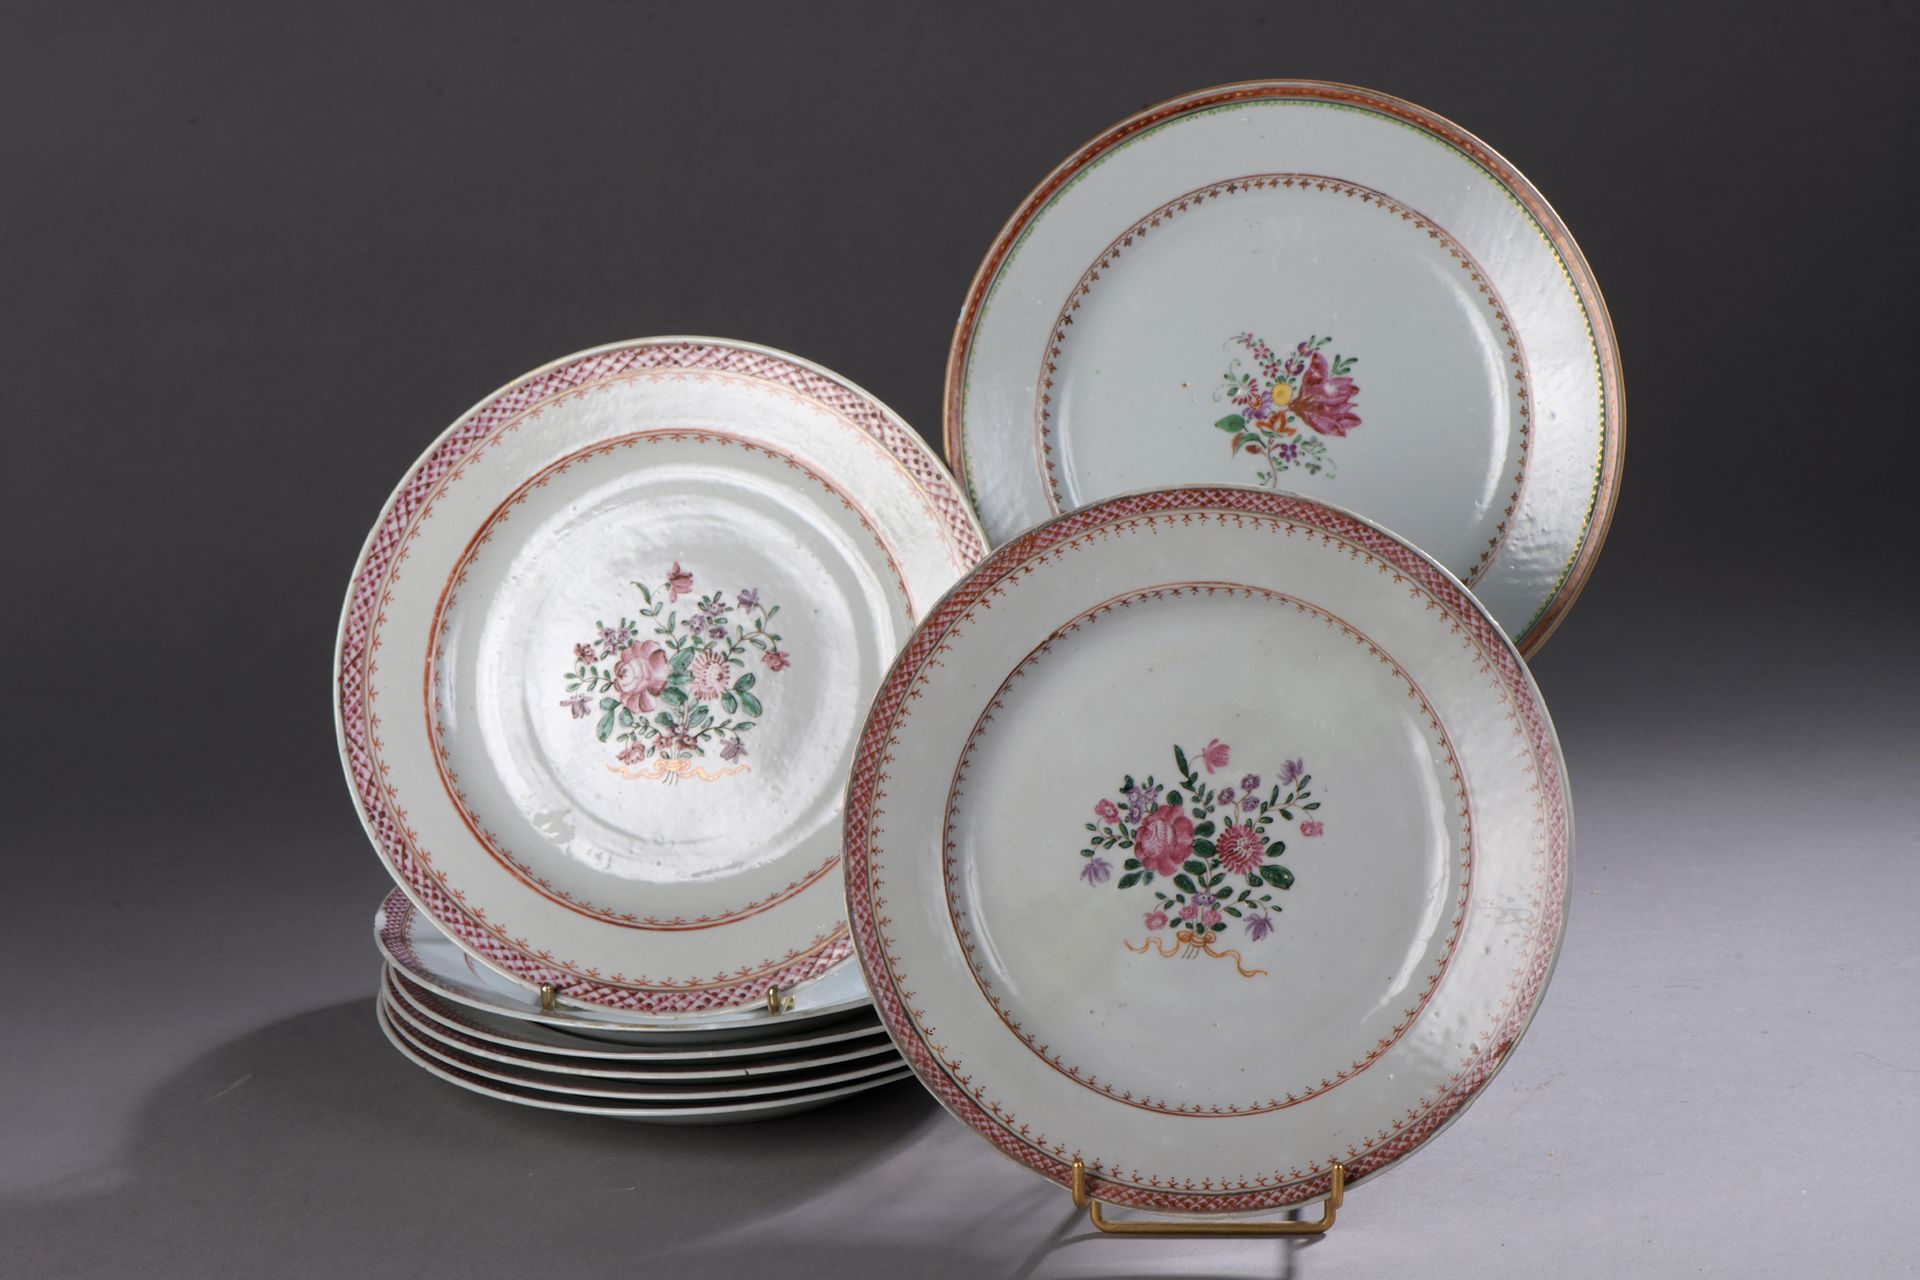 Null CHINA, Cie des Indes

Eight plates with polychrome decoration in the center&hellip;